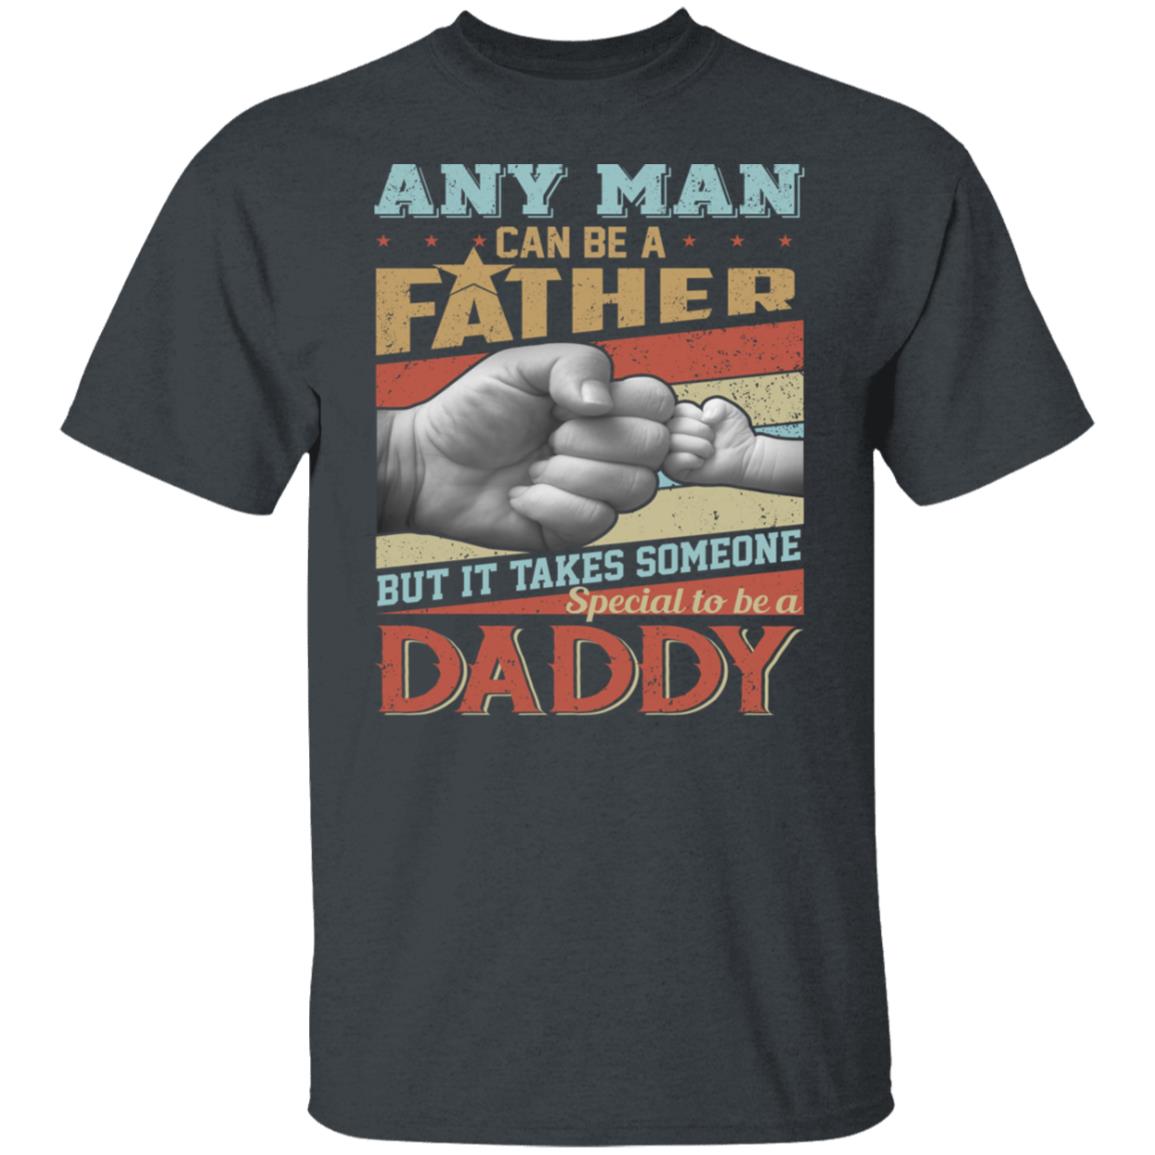 Any Man Can Be A Father T-shirt But It Takes Someone Special To Be A Daddy